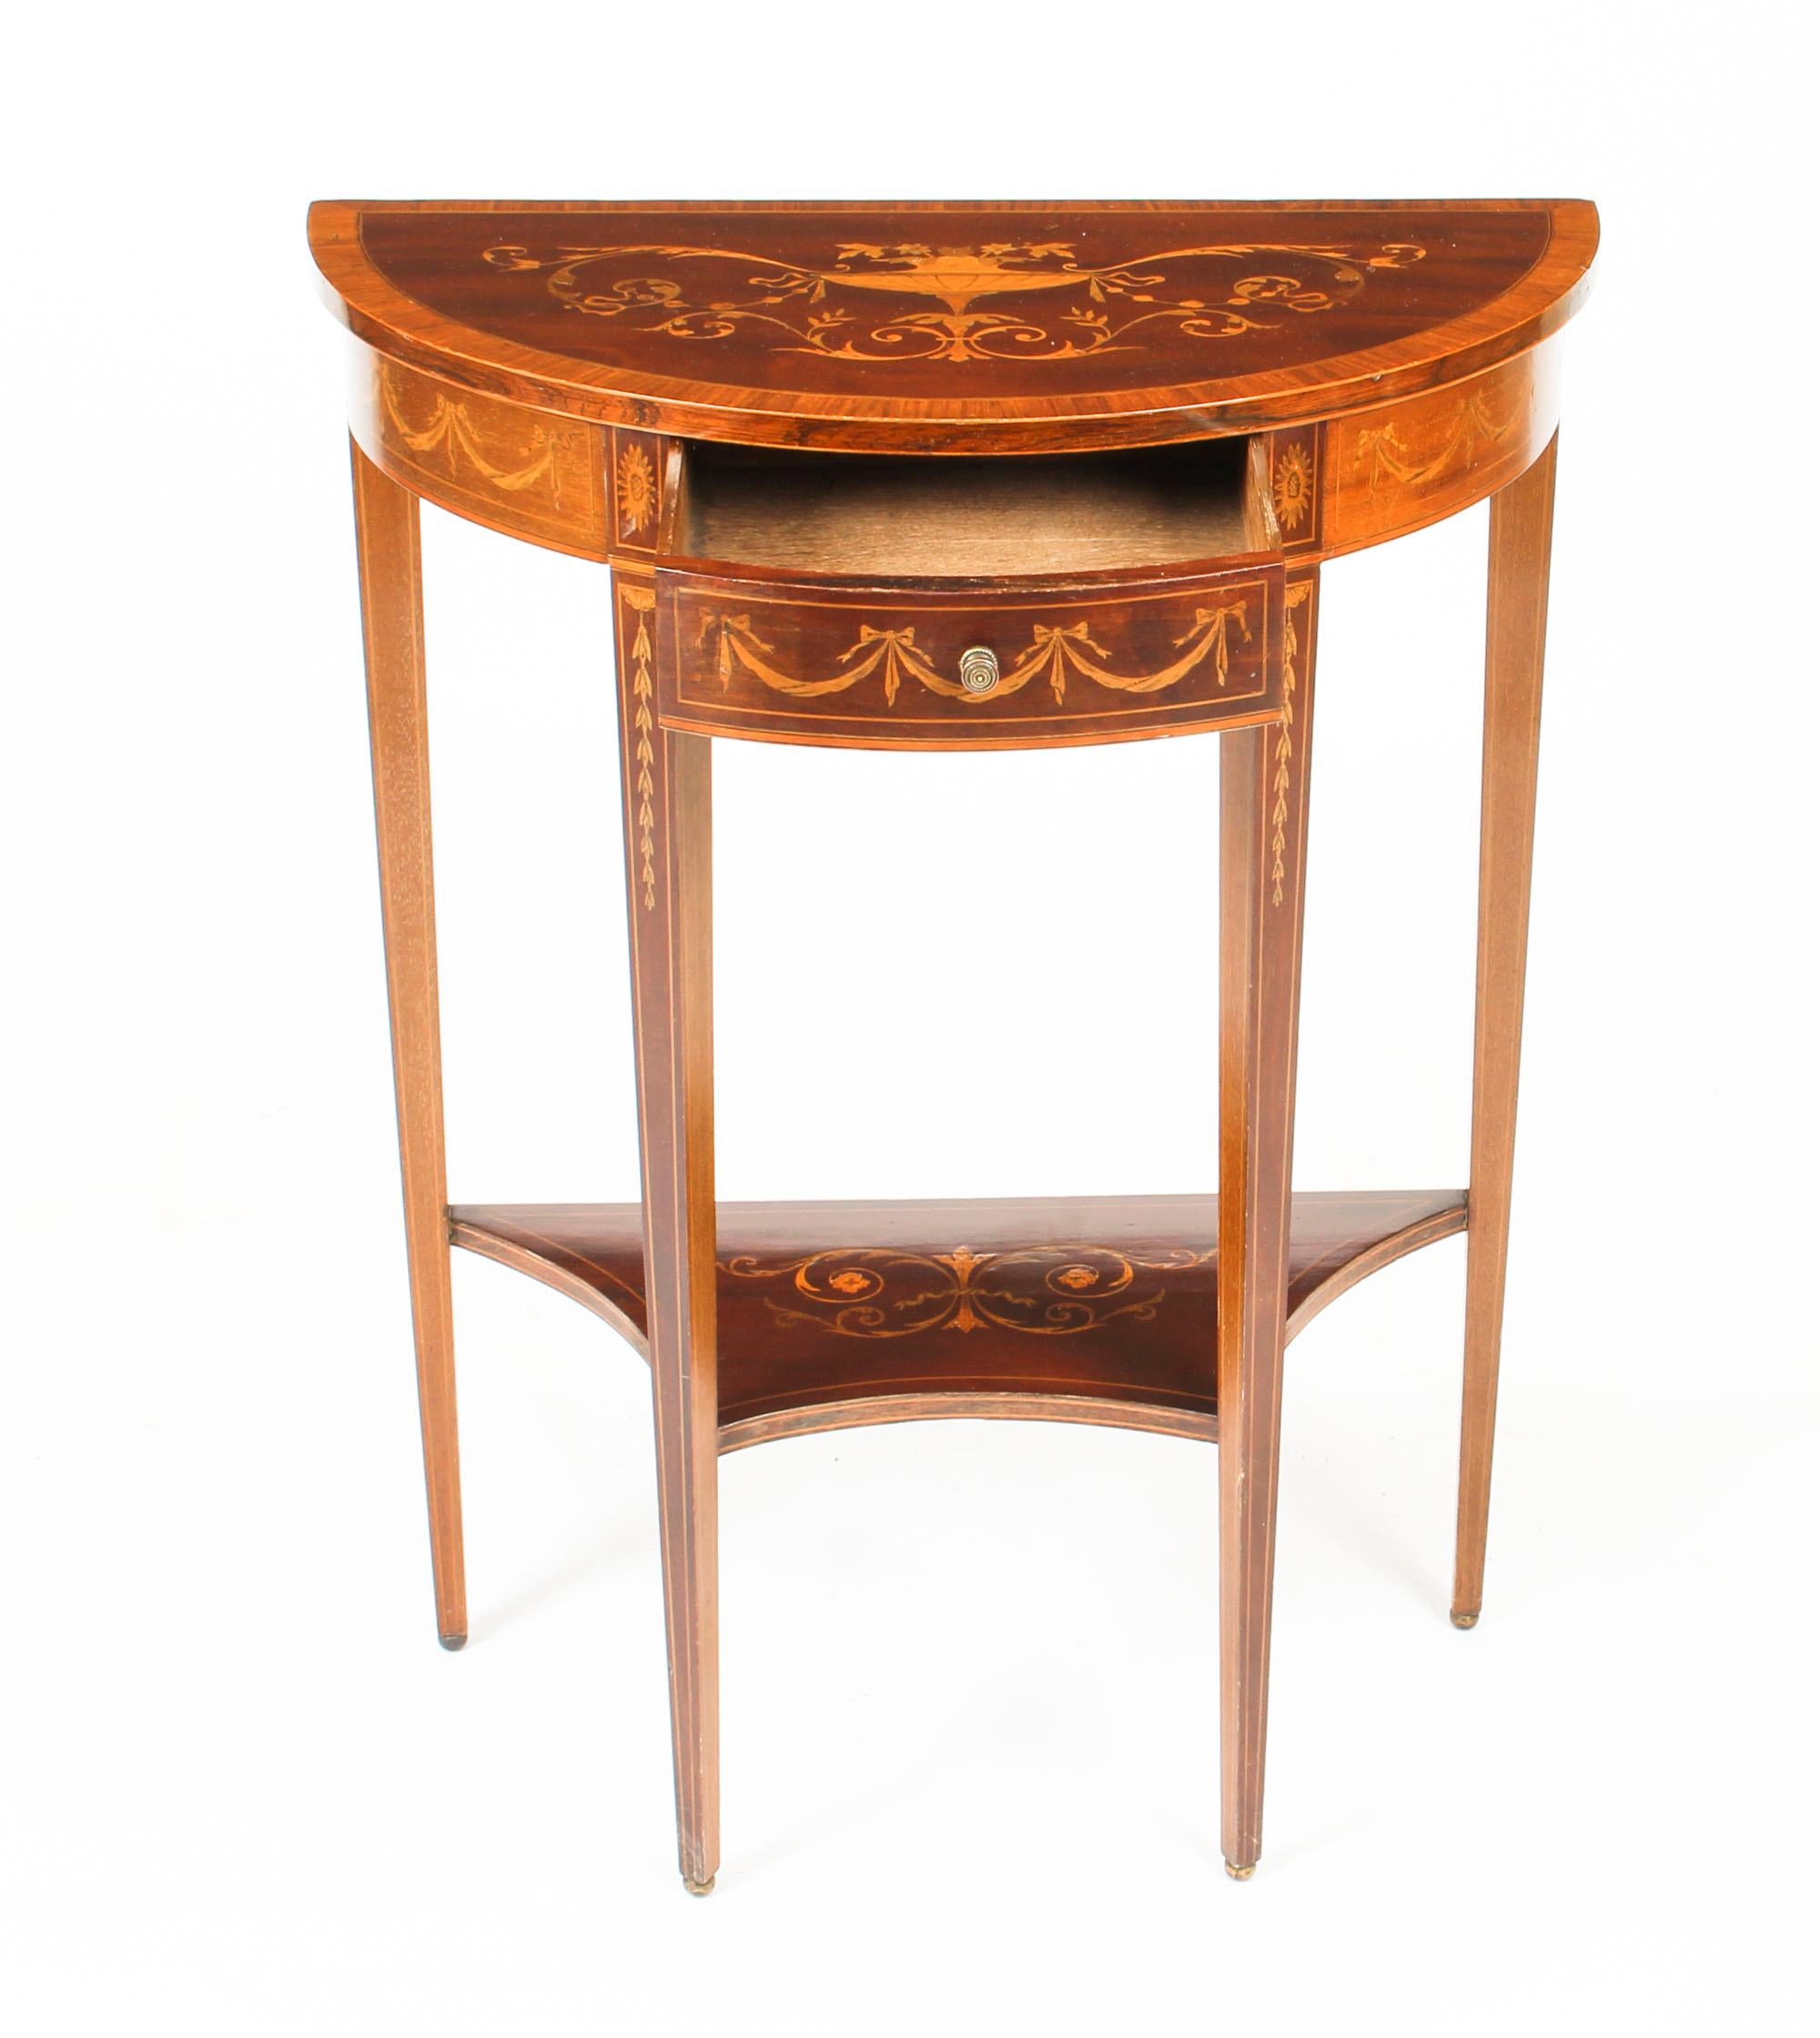 Mahogany Antique Regency Revival Marquetry Demilune Console Table, 19th Century